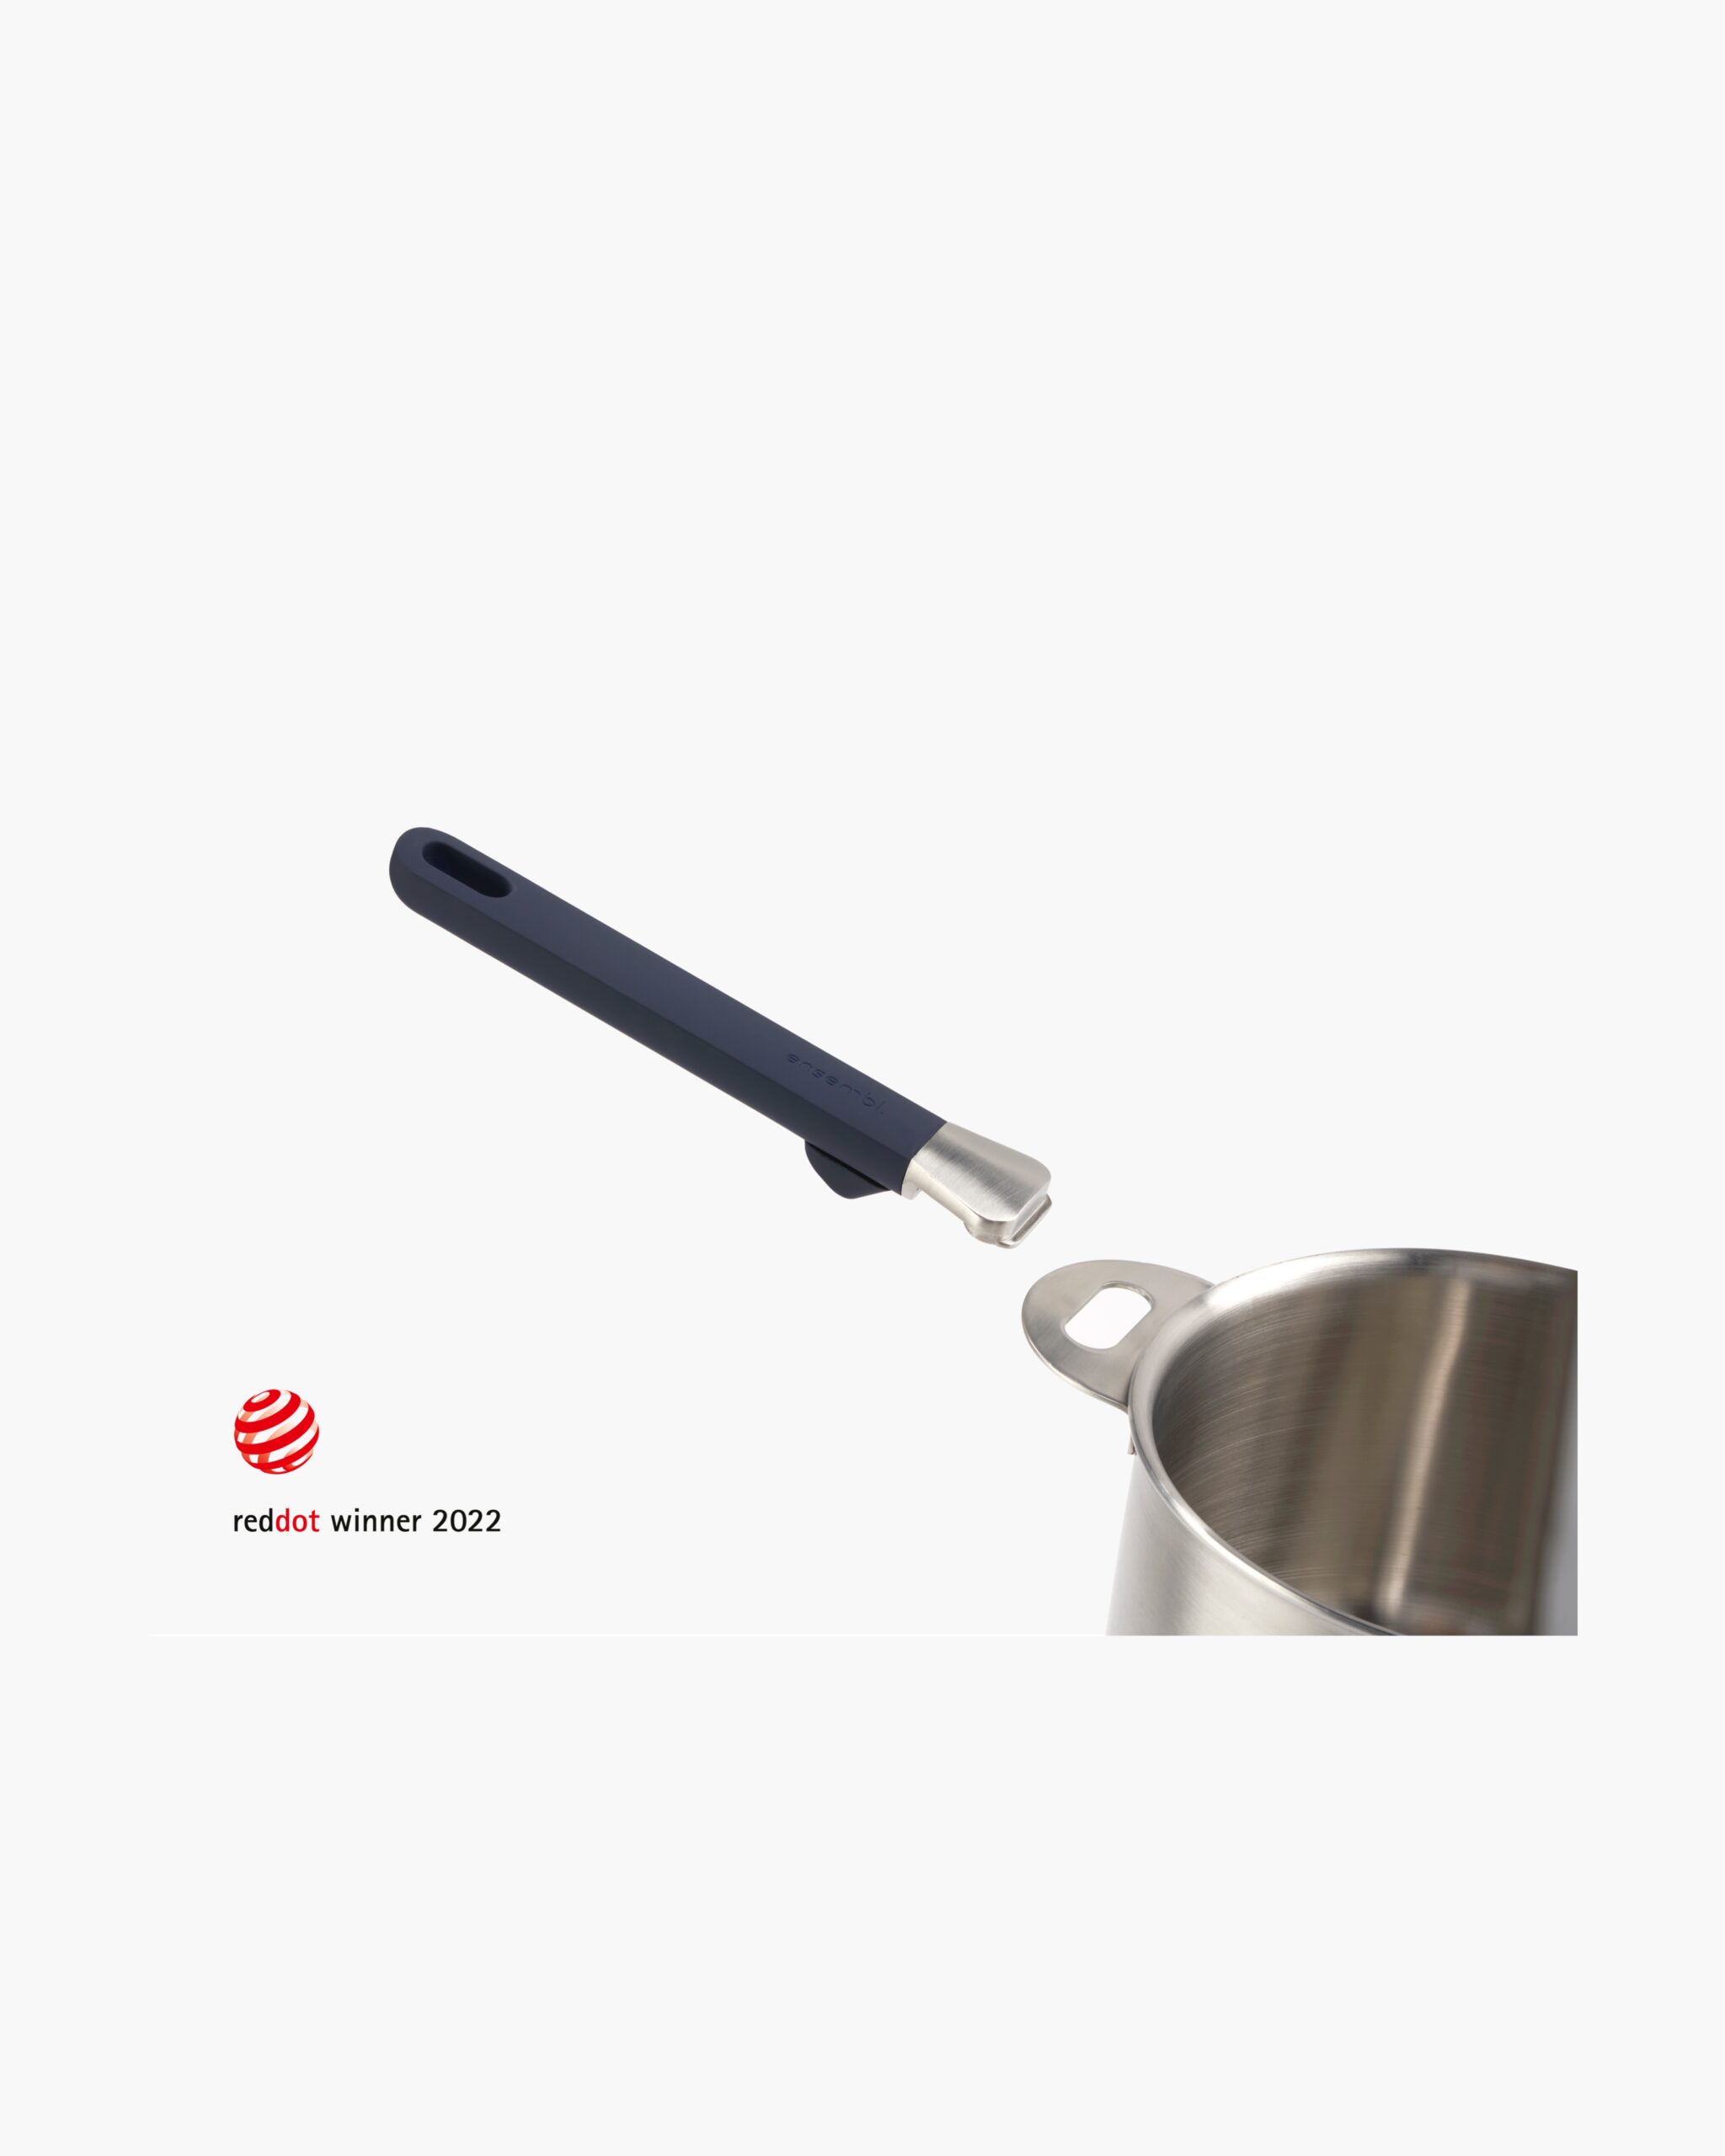 ENSEMBL Stackware Patented Removable Handle Cookware Stainless Steel Red Dot Design Award Winning.